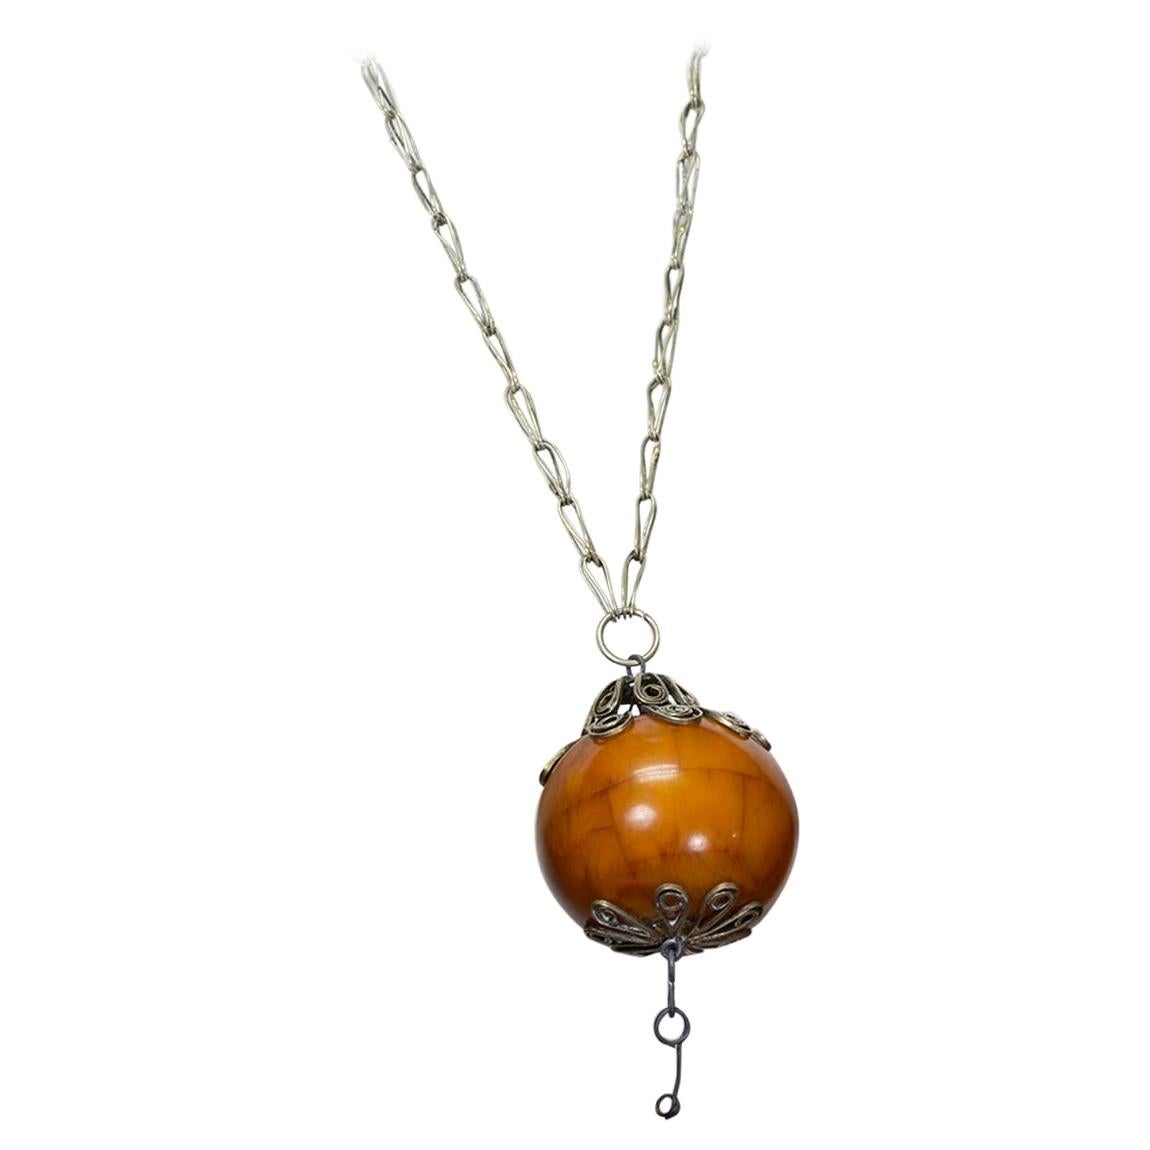 Moroccan 7" Solid Amber Globe Statement Pendant Necklace w Provenance- 26", 1969